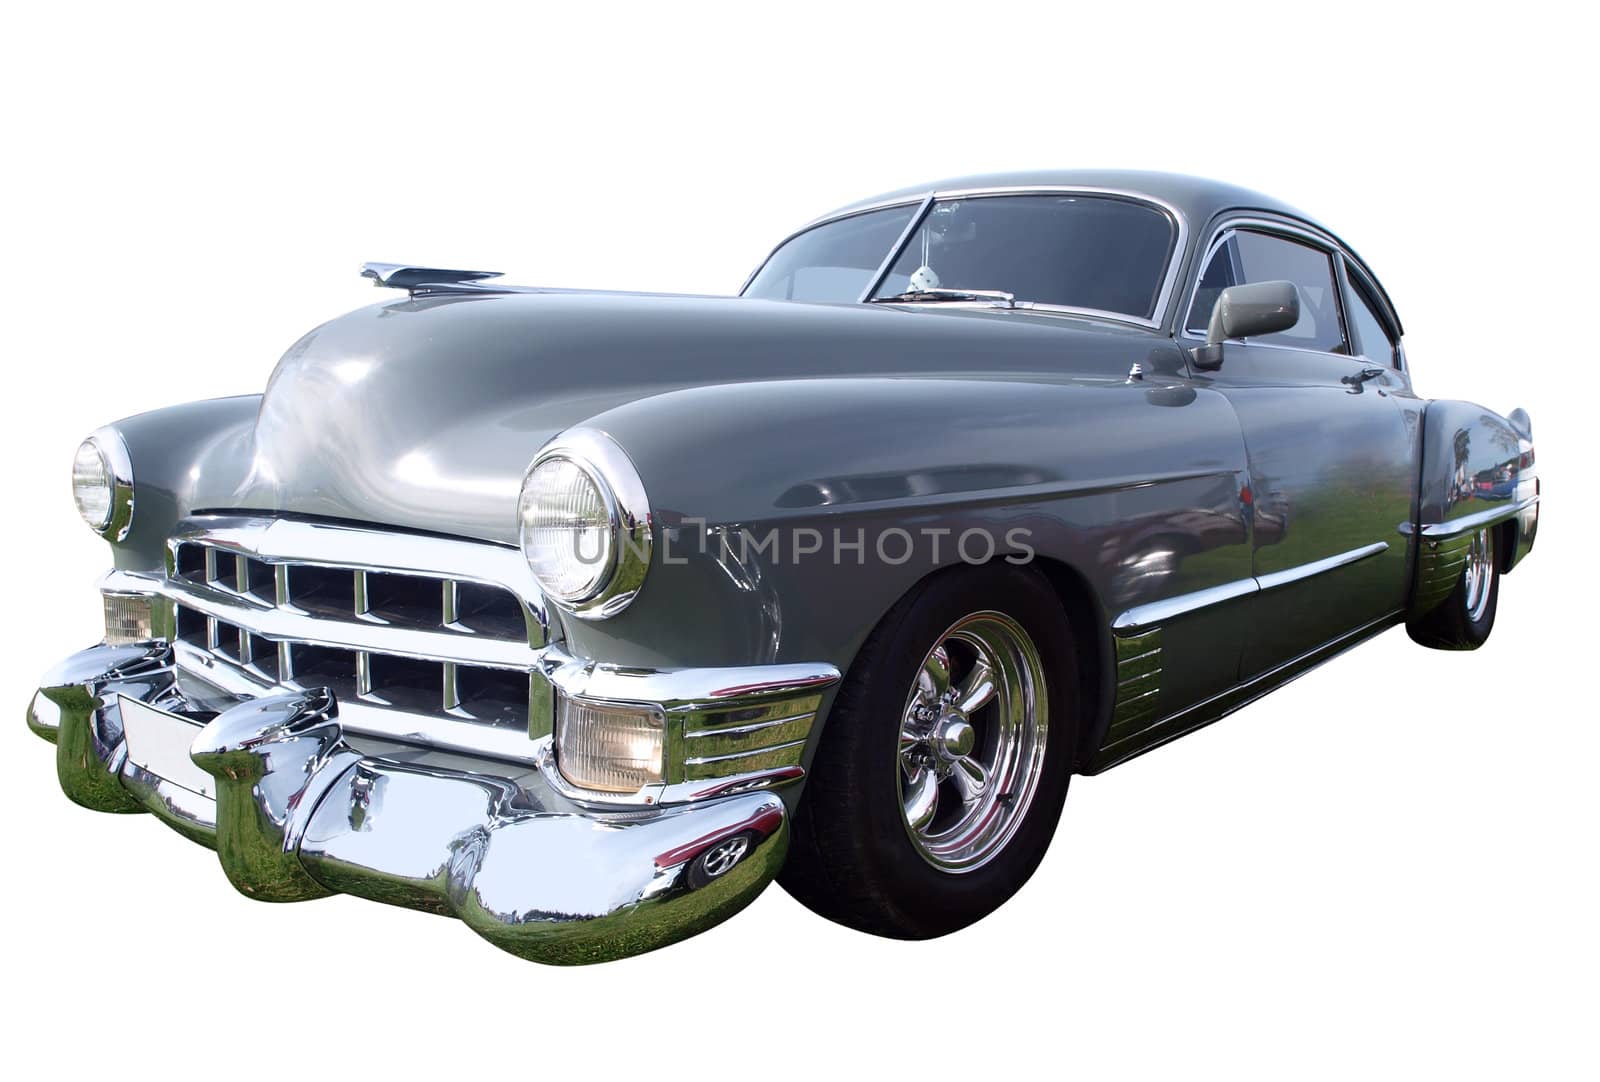 1949 Cadillac Series 62 Sedanette isolated with clipping path        